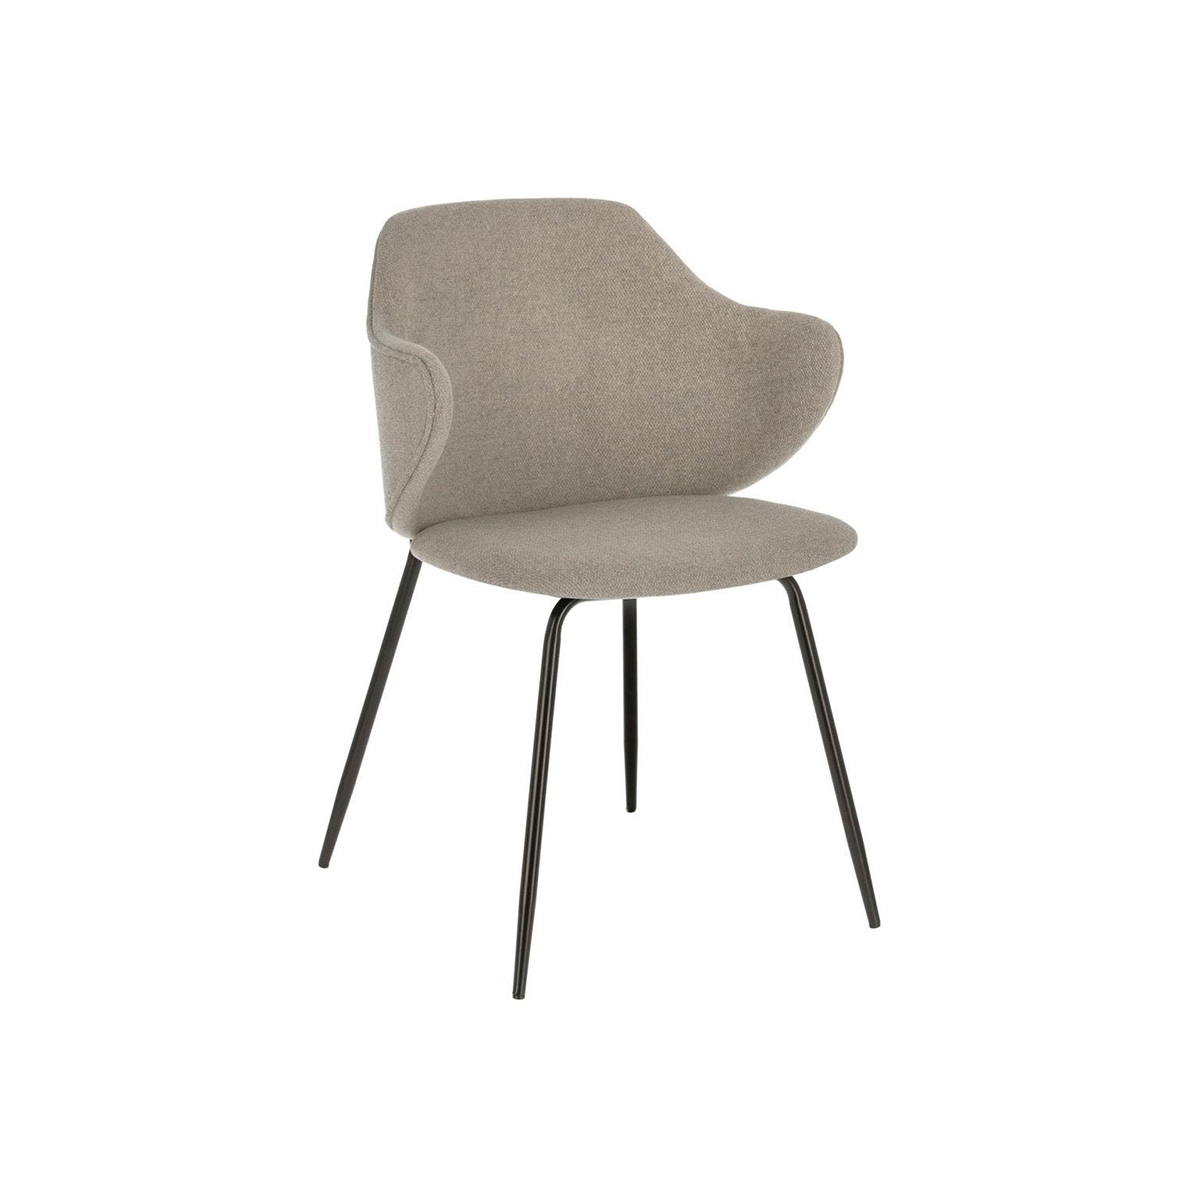 FondHouse Focuis Fabric Dining Chair in Grey/Beige